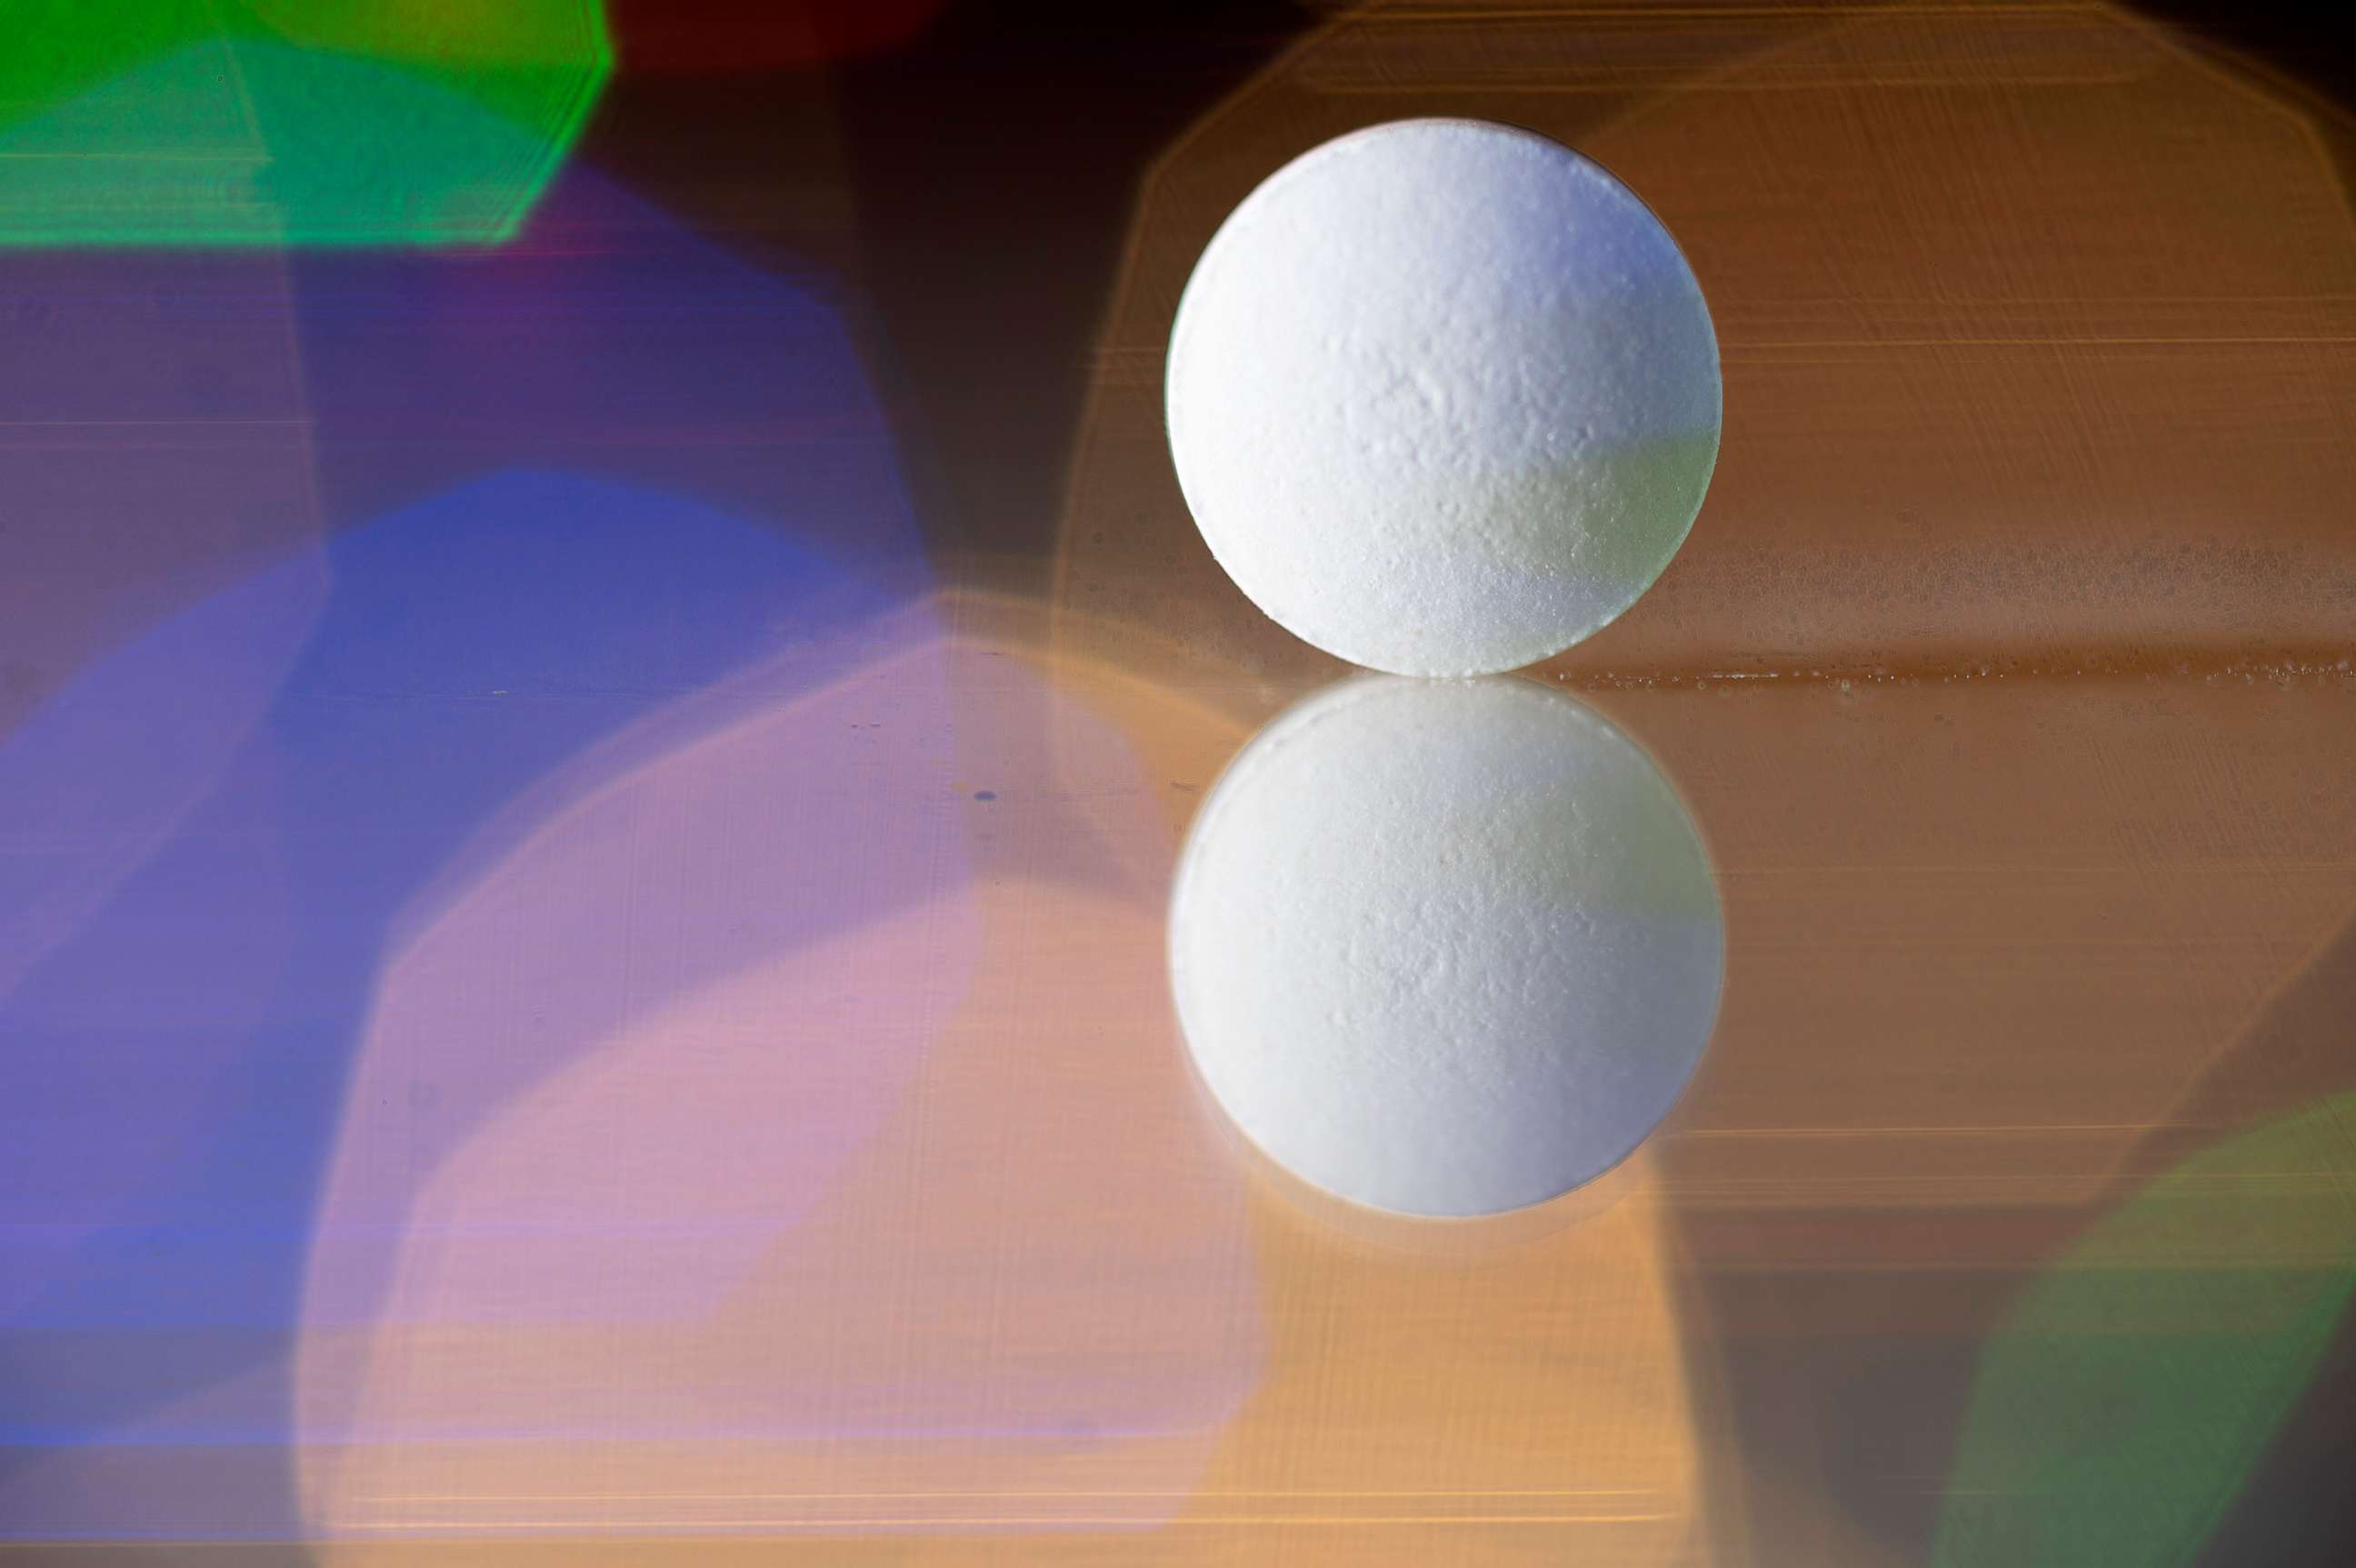 PHOTO: A pill stands on a reflective surface illuminated by multi-colored lights in an undated stock image.